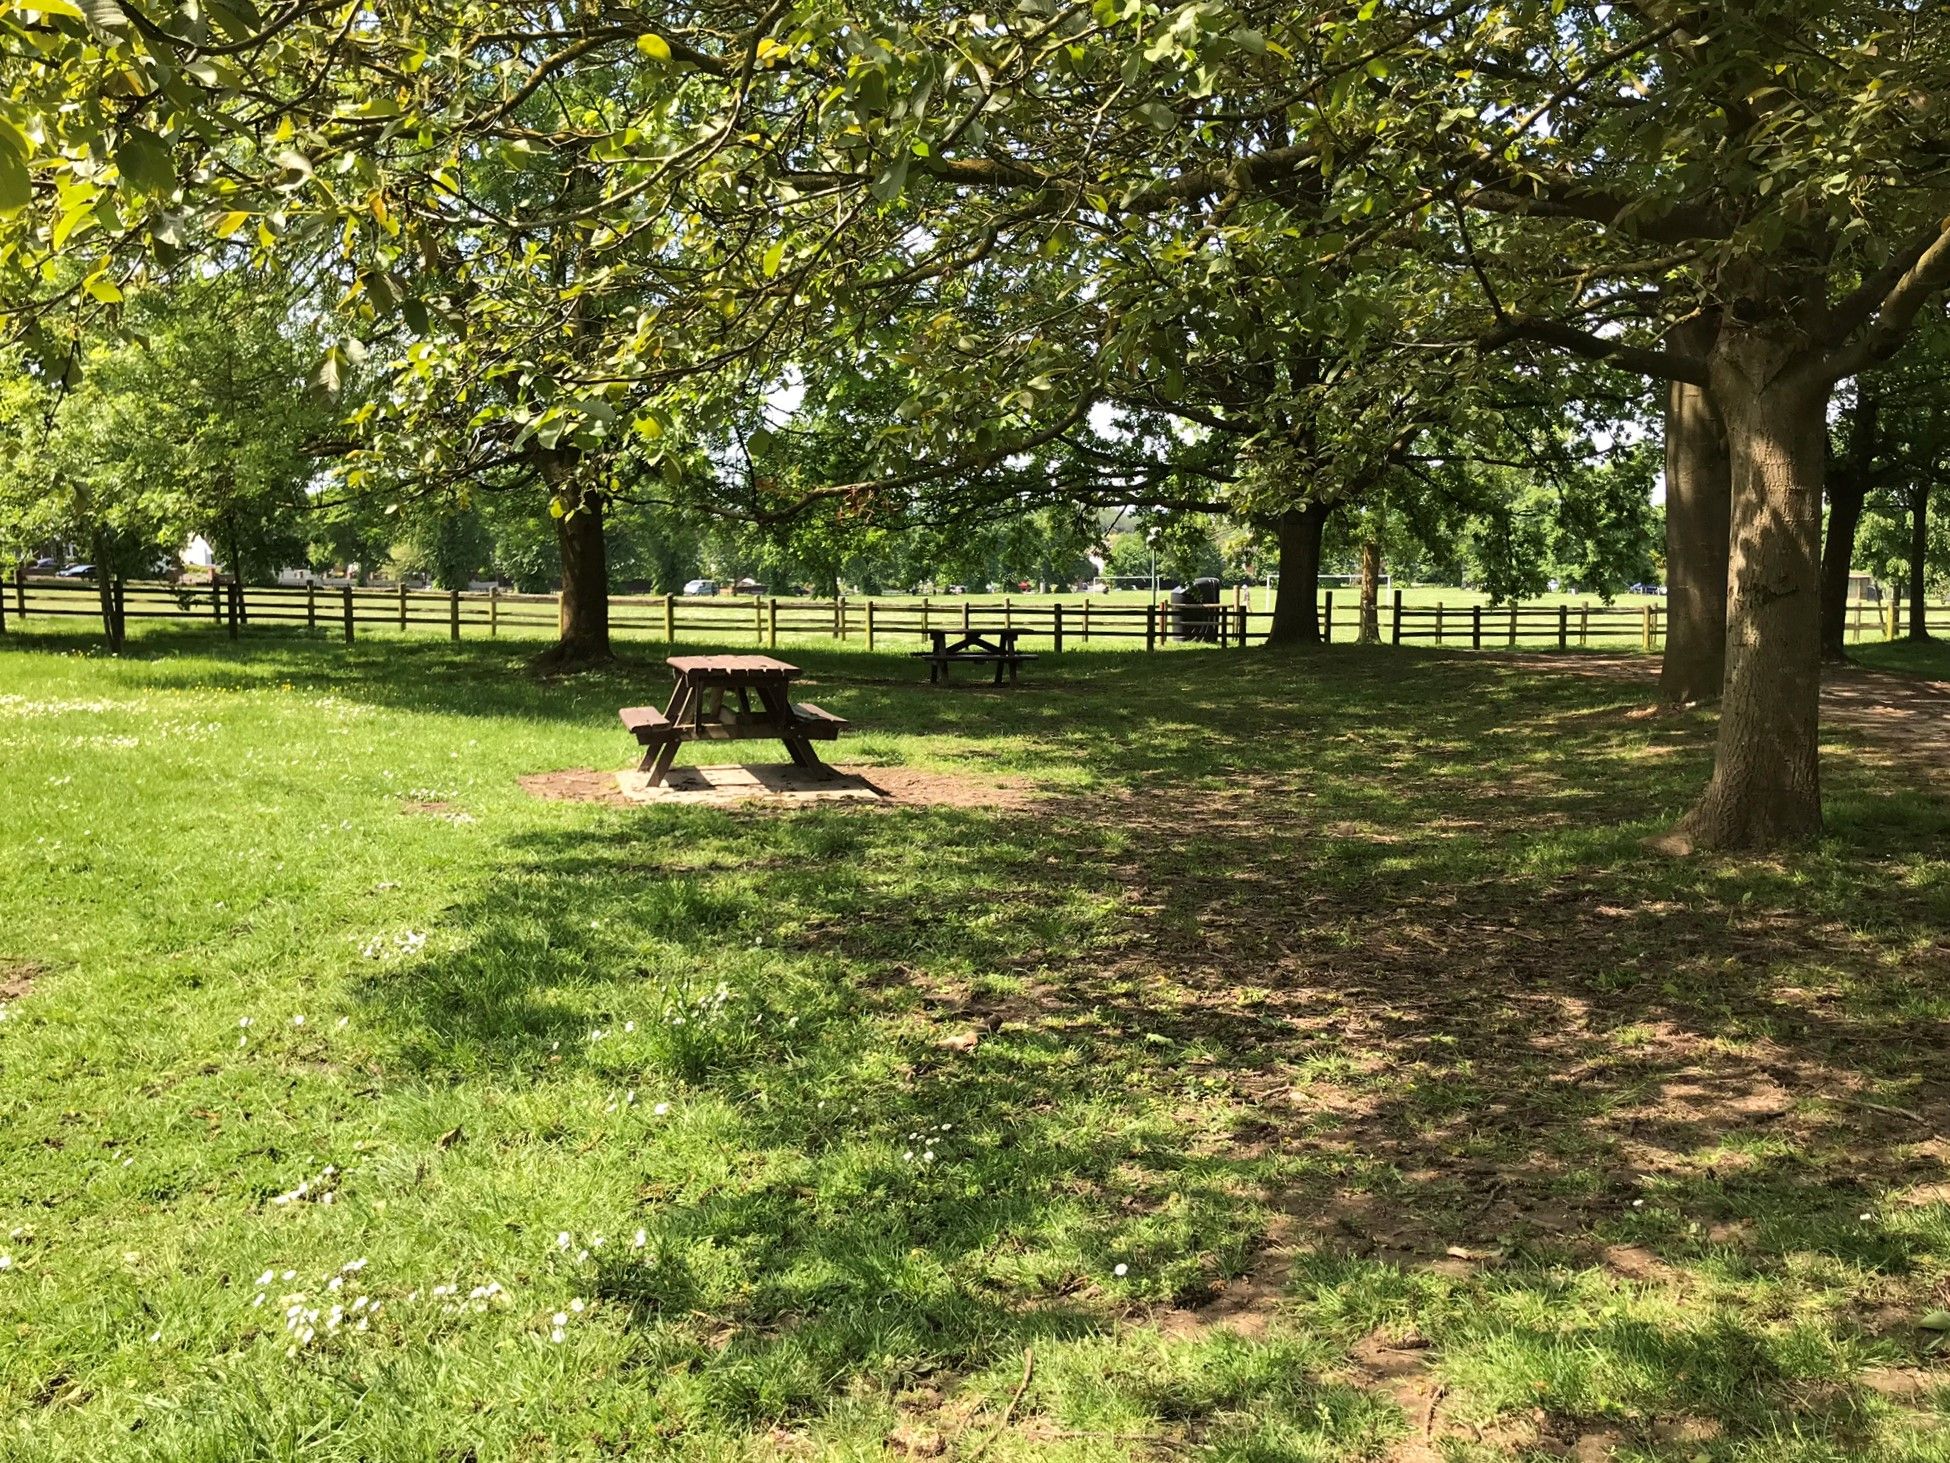 picnic tables in the shade looking towards the cricket pitch.